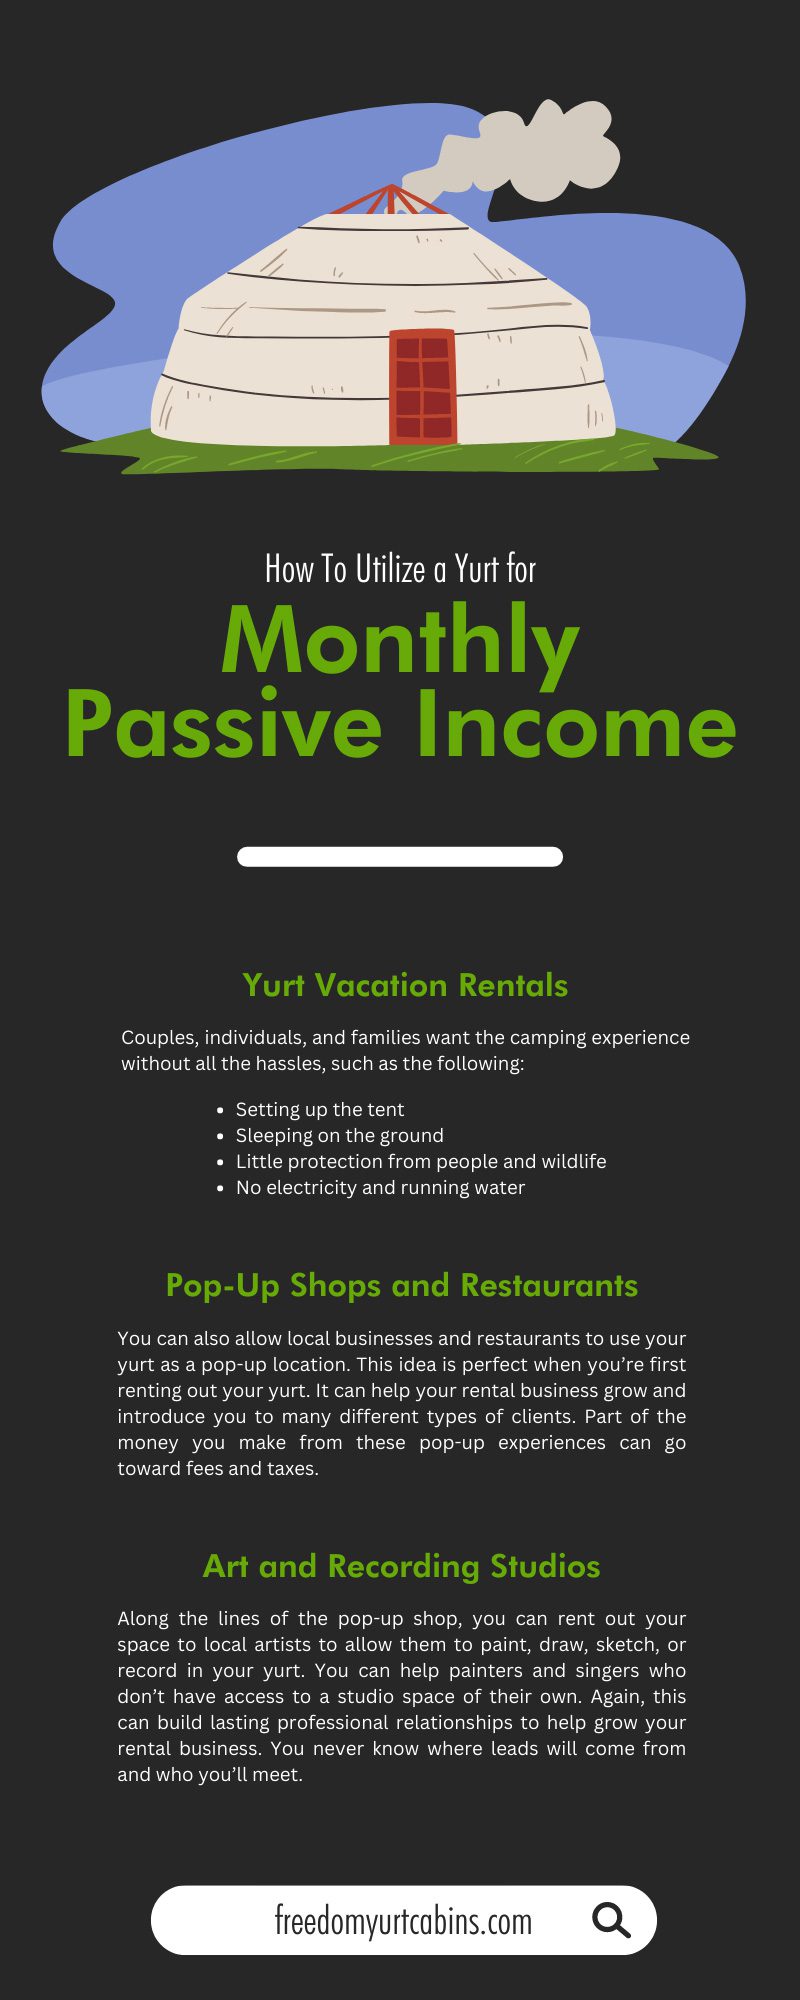 How To Utilize a Yurt for Monthly Passive Income
